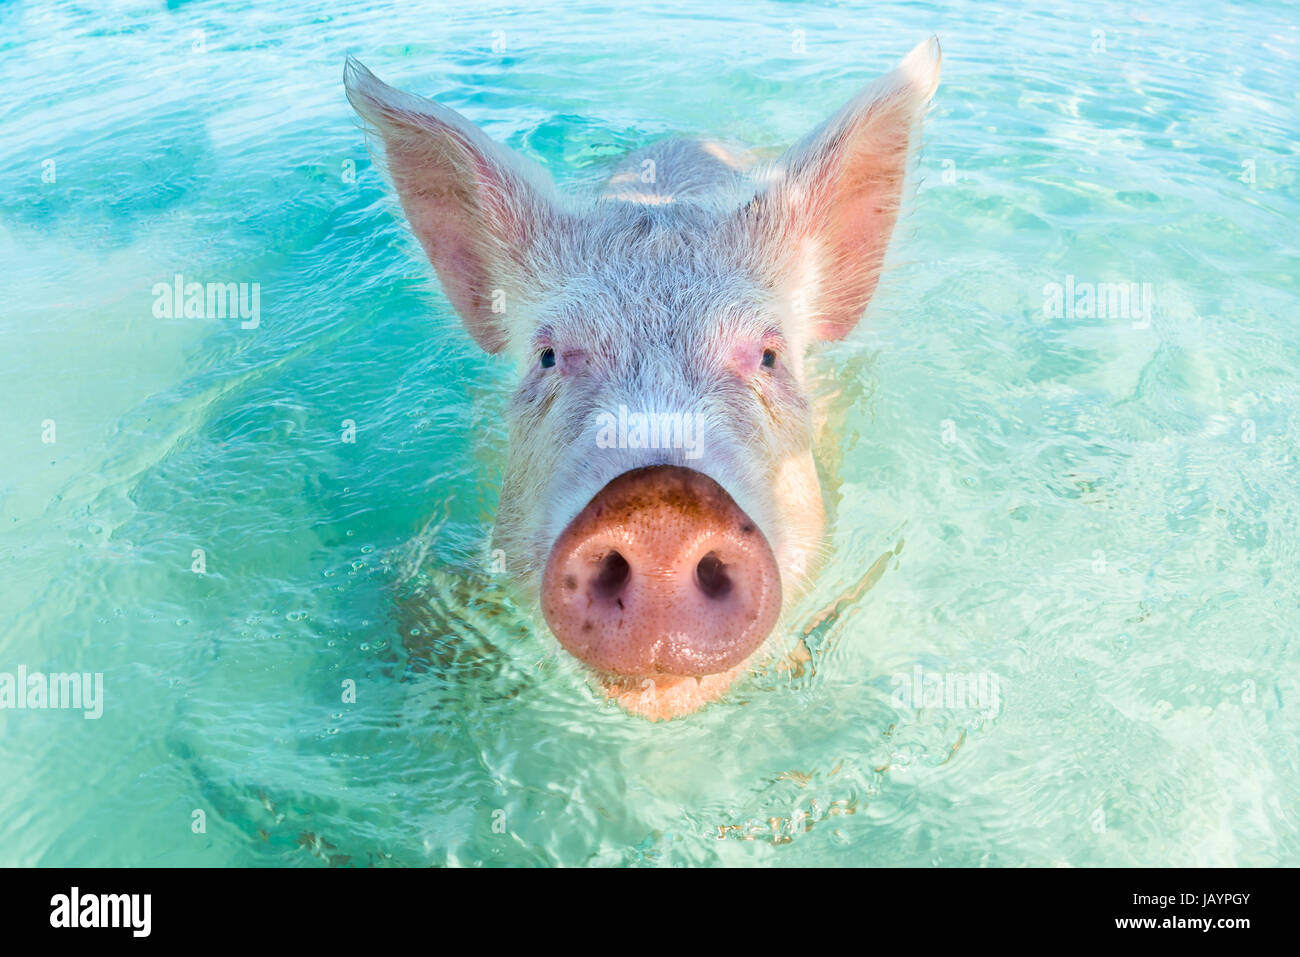 In Big Major Cay, the Exumas, you can get very close to the famous swimming pigs. Bahamas, December Stock Photo